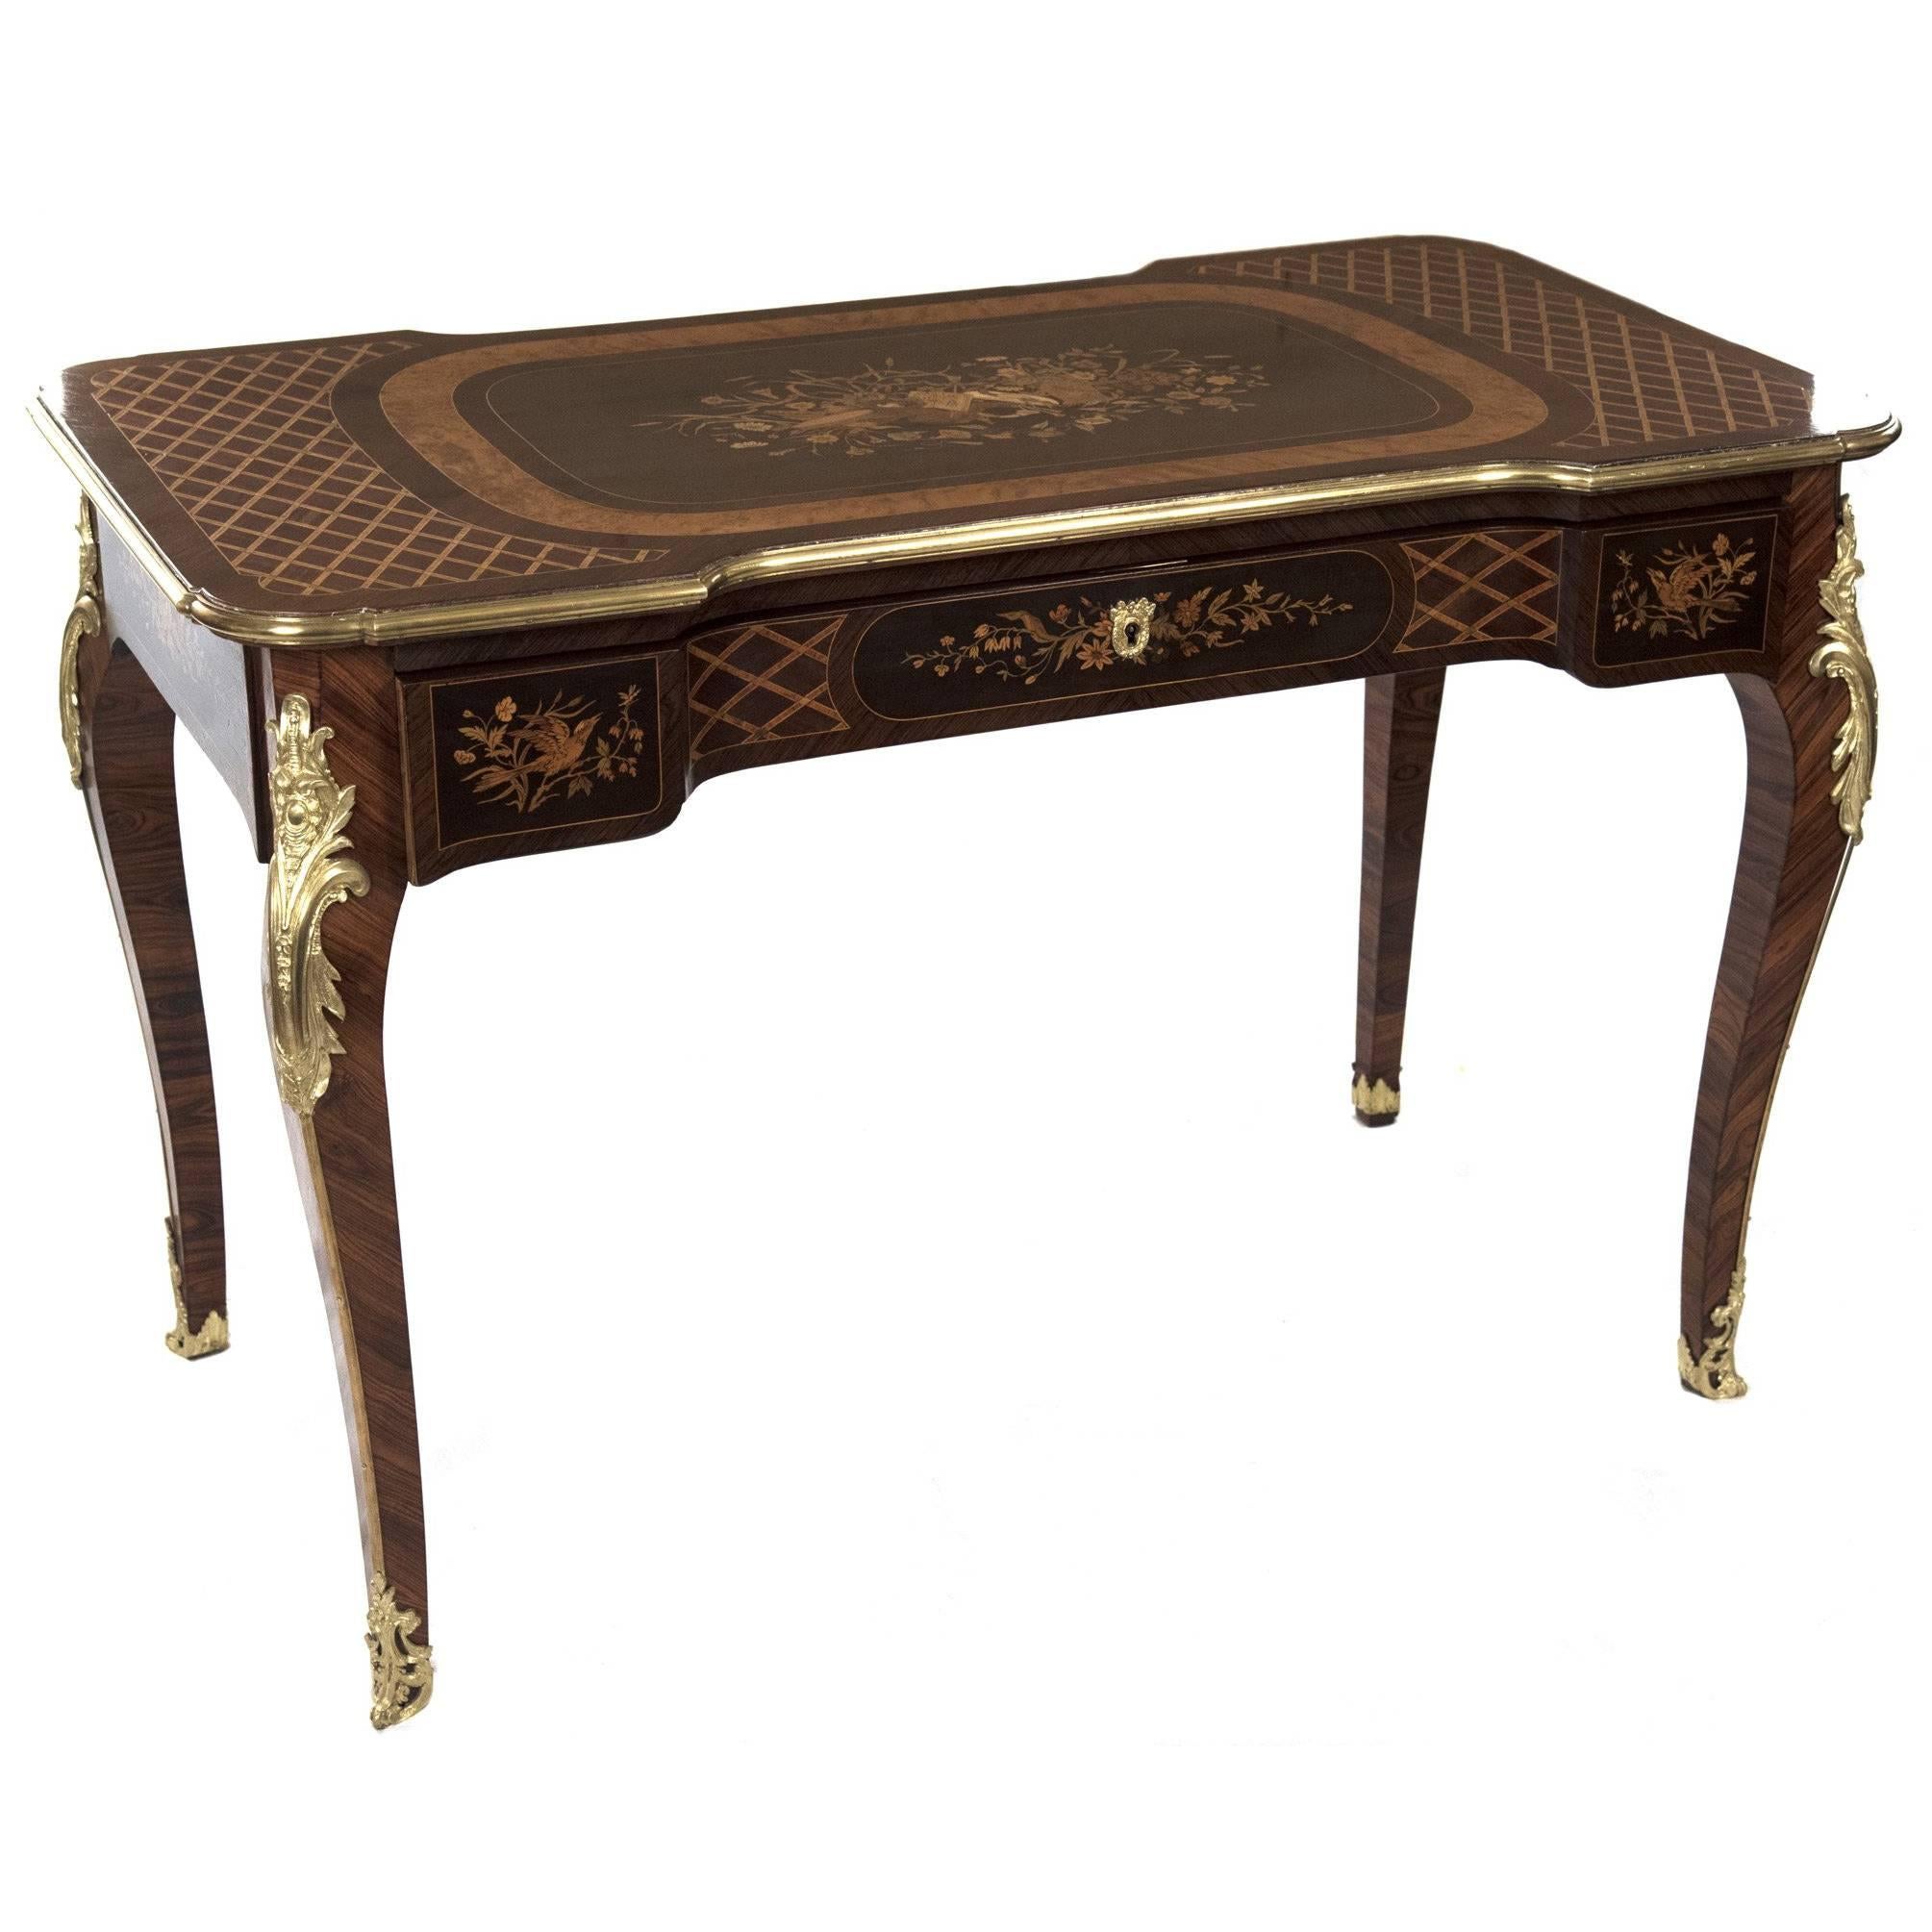 19th Century, French, Louis XV Style Marquetry Bureau Plat with Bronze Mounts